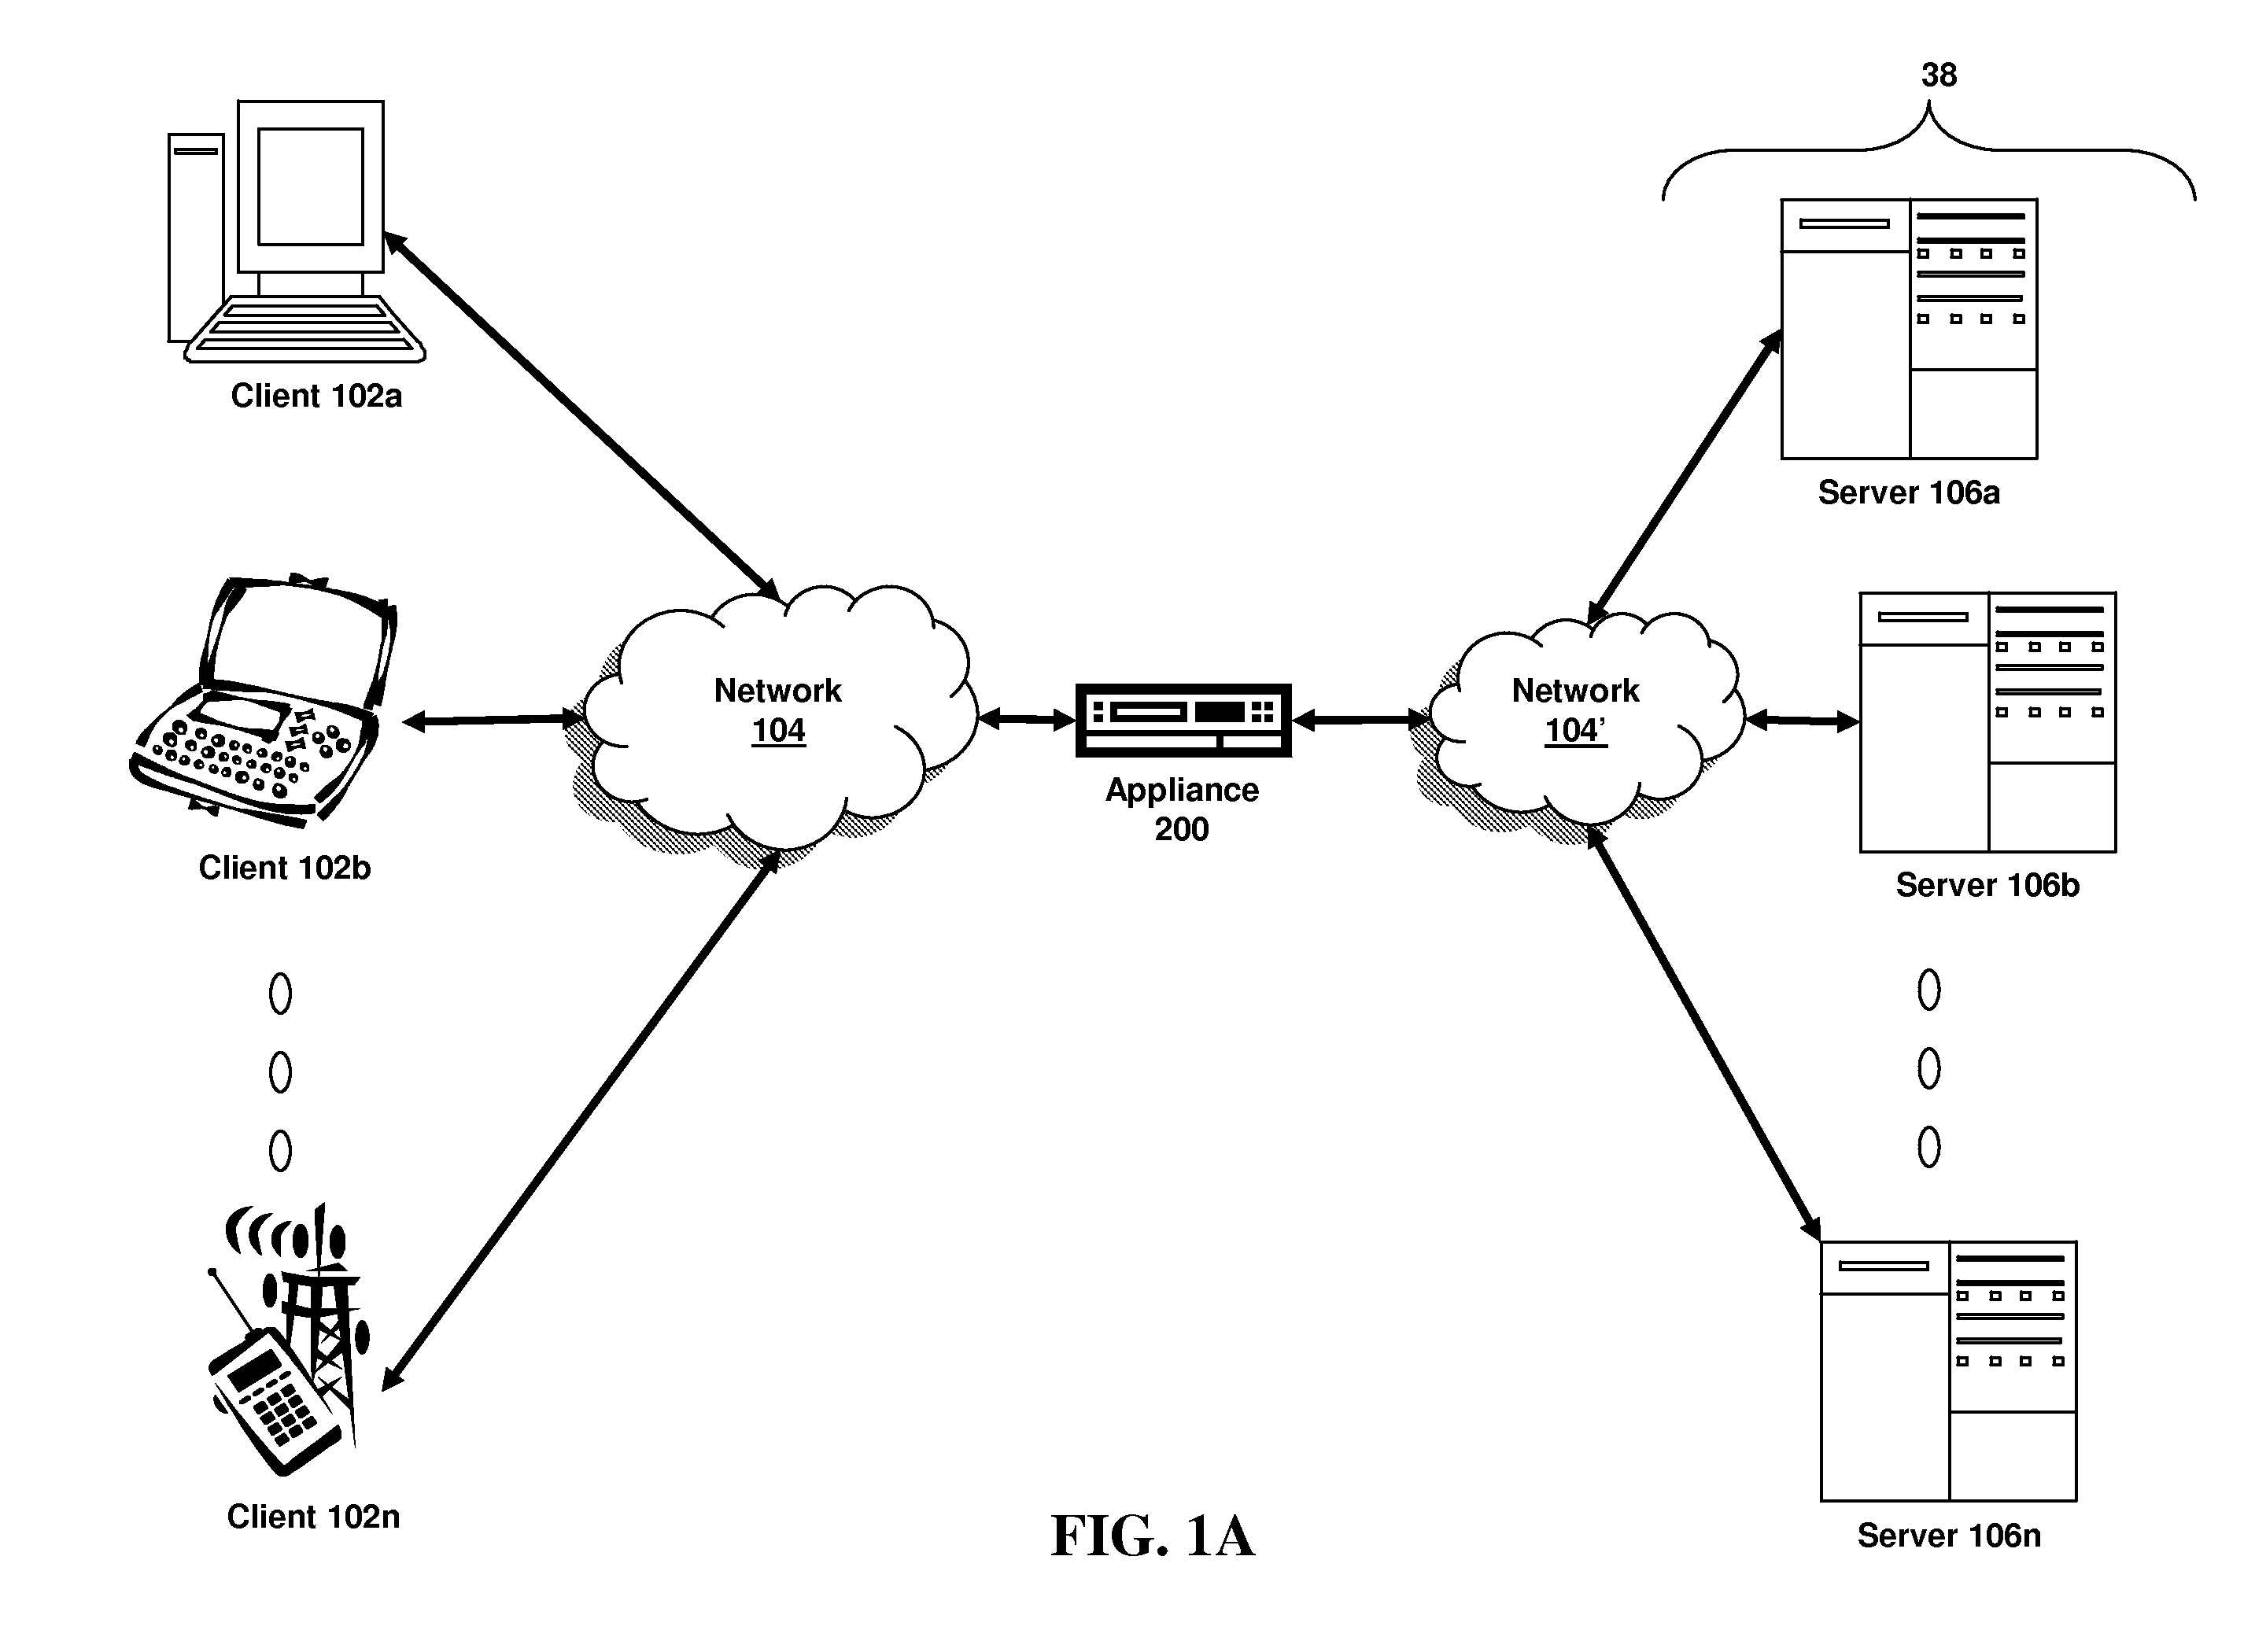 Systems and methods for cookie proxy jar management across cores in a multi-core system